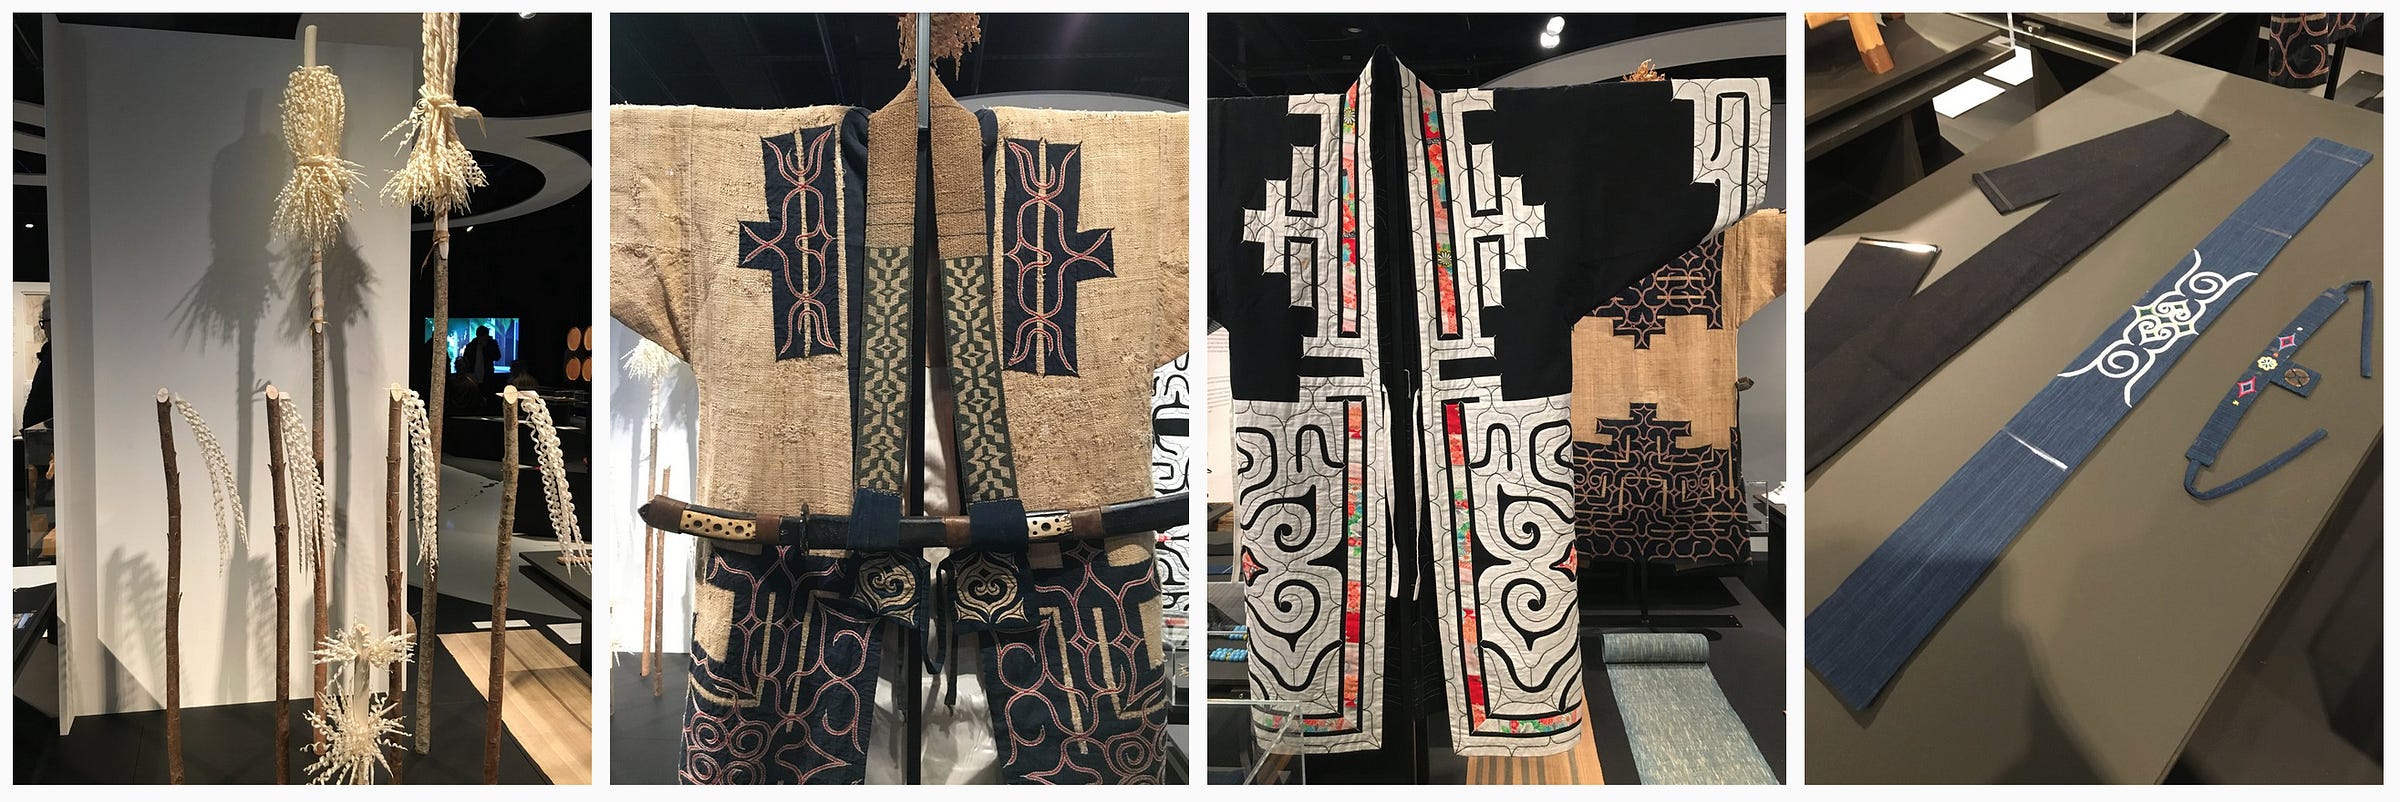 1. Different types of inaw (shaved sticks) made from willow displayed in a particular pattern as if at a ritual alter; 2. An attus amip (elm bark robe), emus-at (sword and sword strap) and sapa-unpe (ceremonial headdress, not all shown); 3. A kaparamip (thin robe) with black base cotton fabric and heavily decorated with white cotton appliqué; 4. Headbands and chokers worn by women during celebrations.